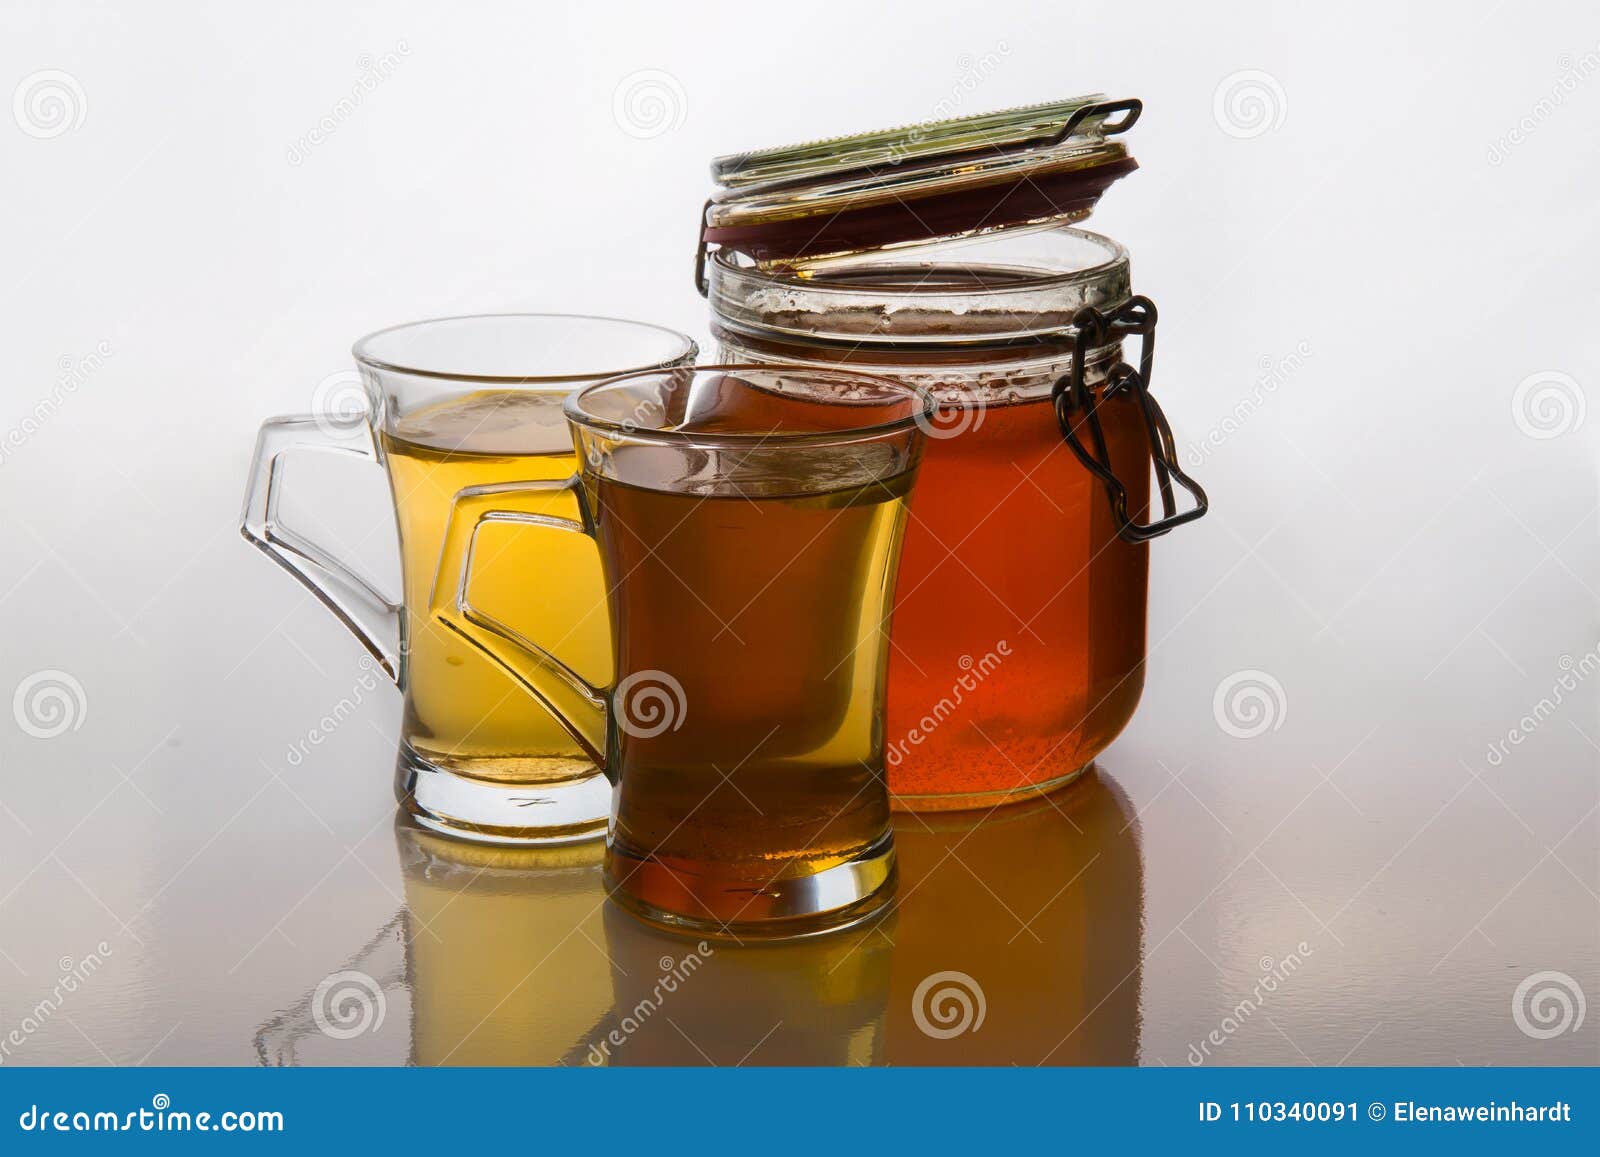 green tea in glass cups with honey and lemon on white background with mint